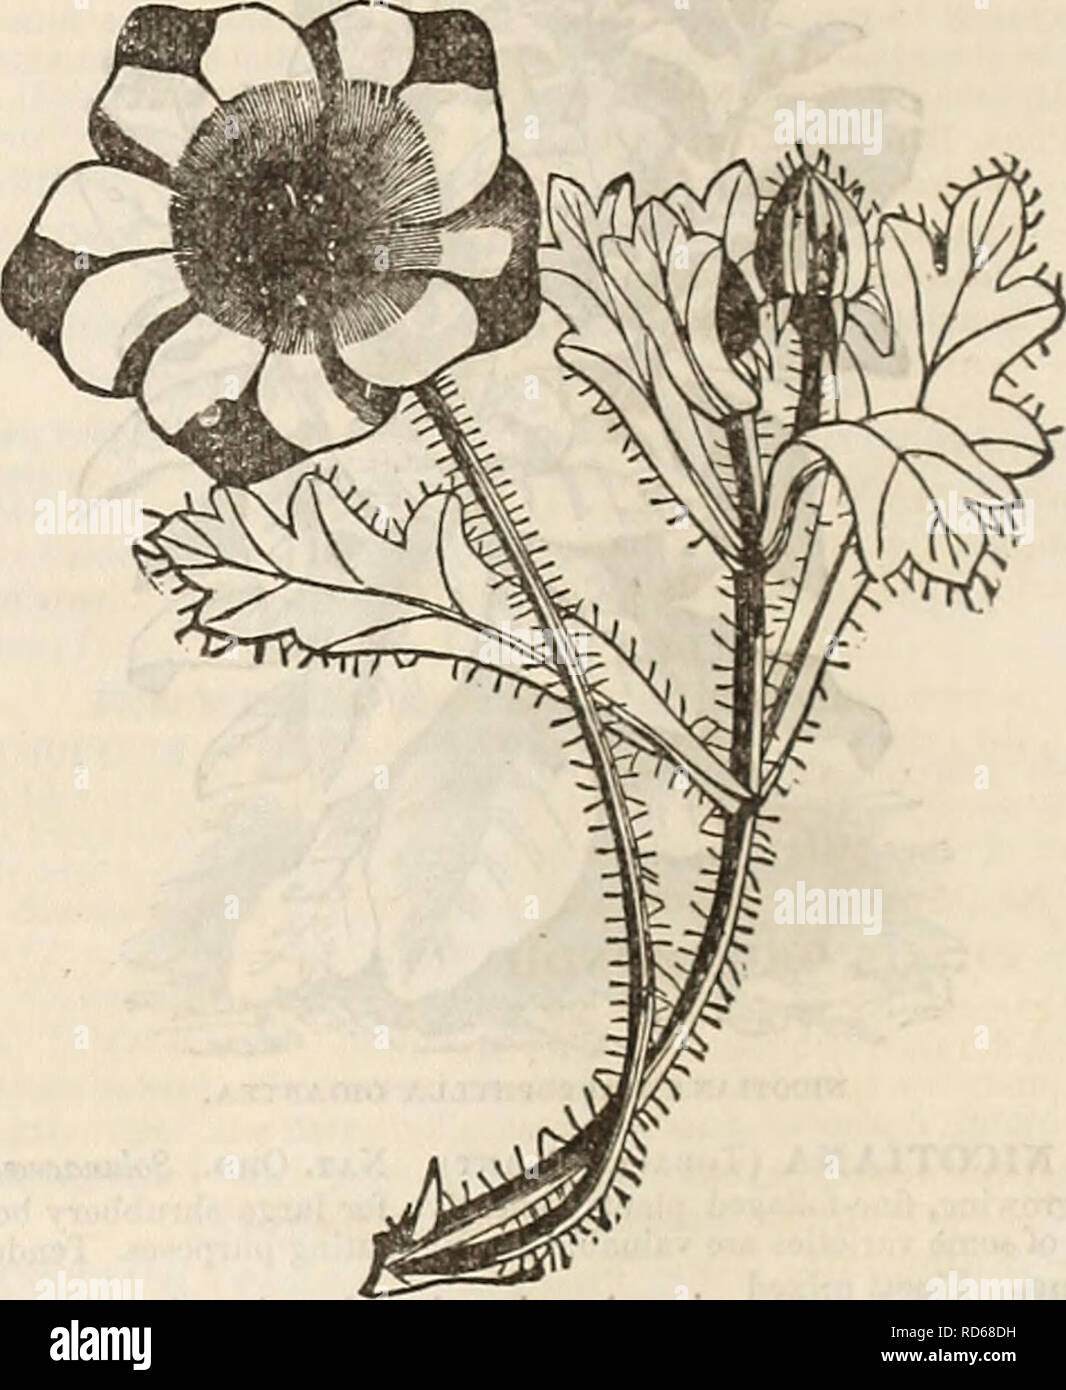 . Curtis, Cobb &amp; Washburn's amateur cultivator's guide to the flower and kitchen garden for 1878. Nursery stock Massachusetts Catalogs; Flowers Seeds Catalogs; Kitchen gardens Catalogs. 2^ ^OBB &amp; ASHBURN'S 255 PRICE. Nemophila Discoidalis. Black, witli white edge 05 lasignis. Bright-blue 05 Alba. AVhite. 1 foot 05 Macalata. ^^lite; large purple spots. 1 foot 05 Variegata. White, veined with lOac, and blotched with violet; foliage finely variegated; very effective. 1 foot 05 Good MixedL. .06. NEMOPHILA UACVLAtA, NOLAN A. Nat. Ord., Nolanacea. Very pretty trailing-plant?, after the char Stock Photo